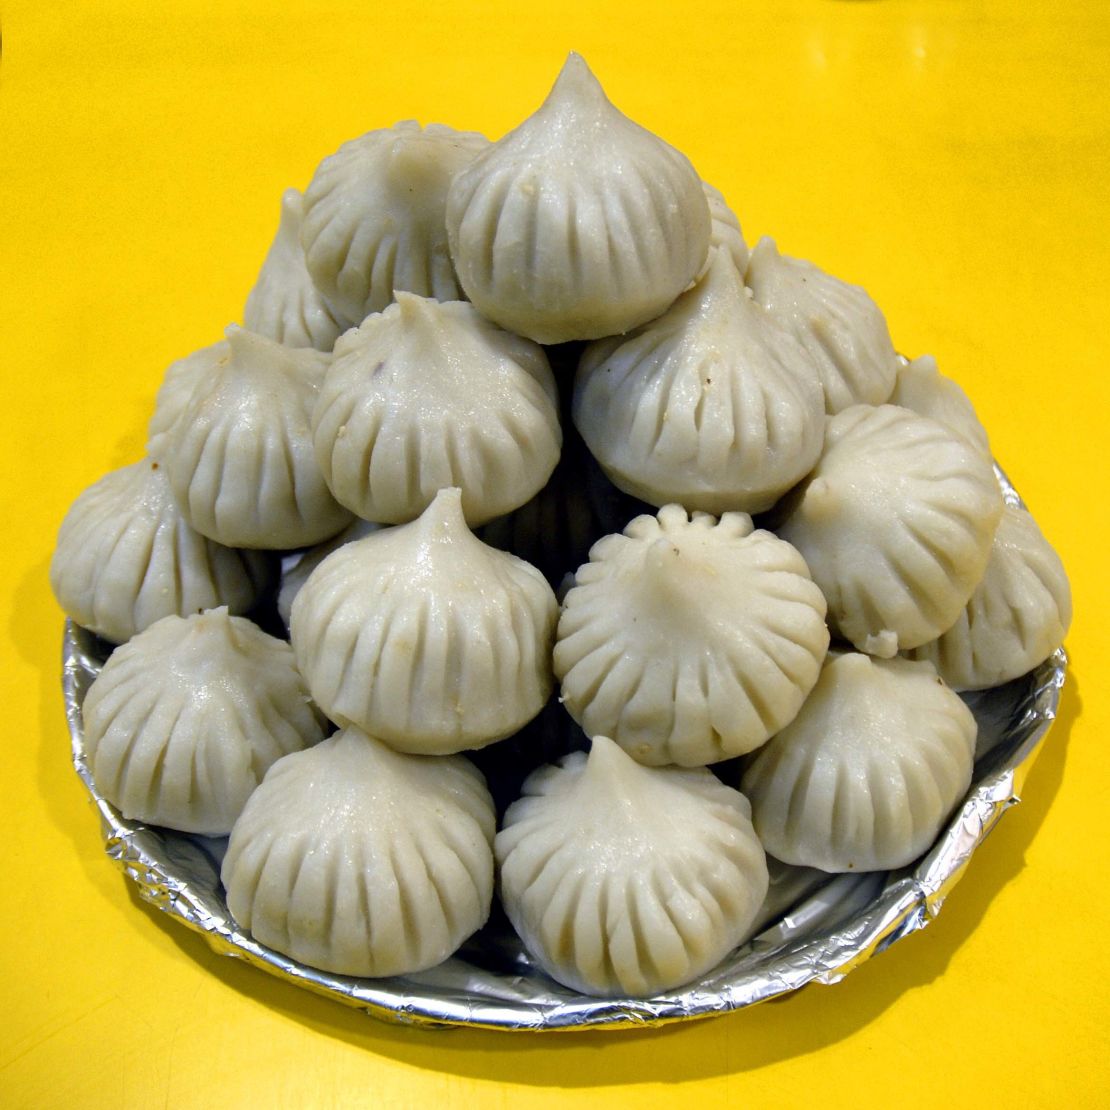 Modak is a sweet treat best savored at home.